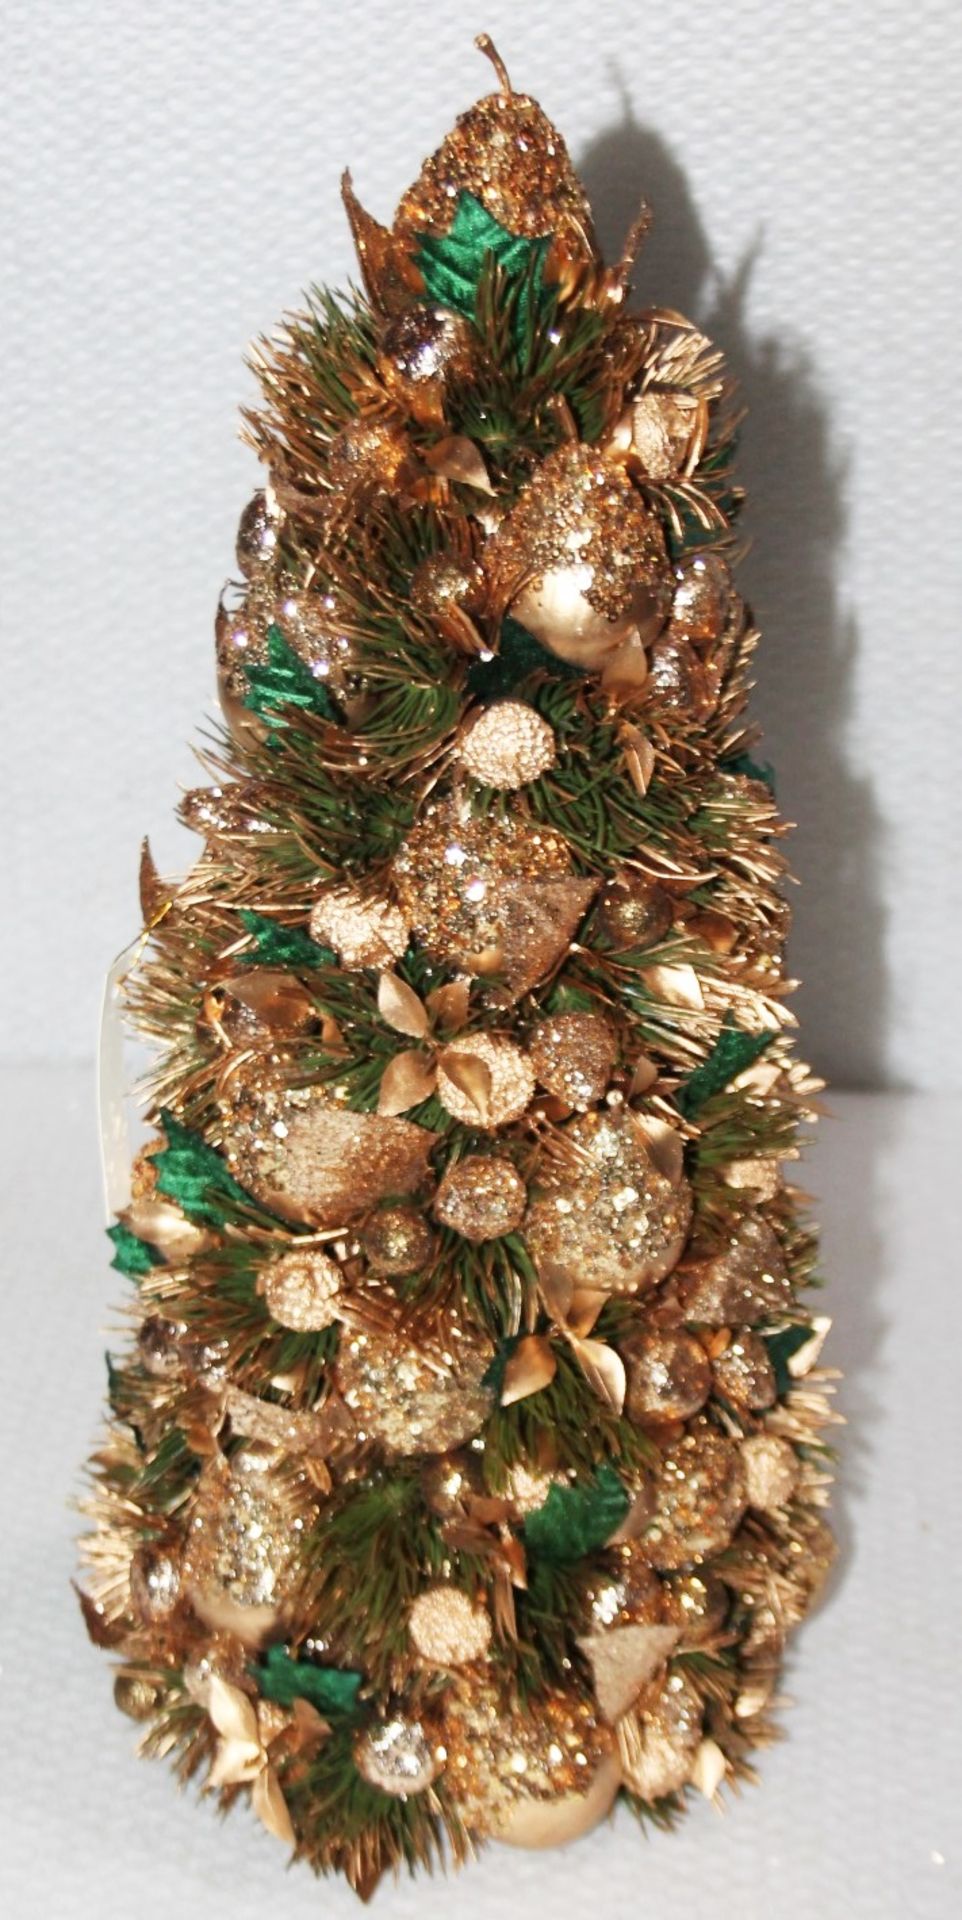 1 x SALZBURG CREATIONS Decorative 'Pear Tree' Ornament In Gold & Green - 18 Inches Tall - Original - Image 2 of 7